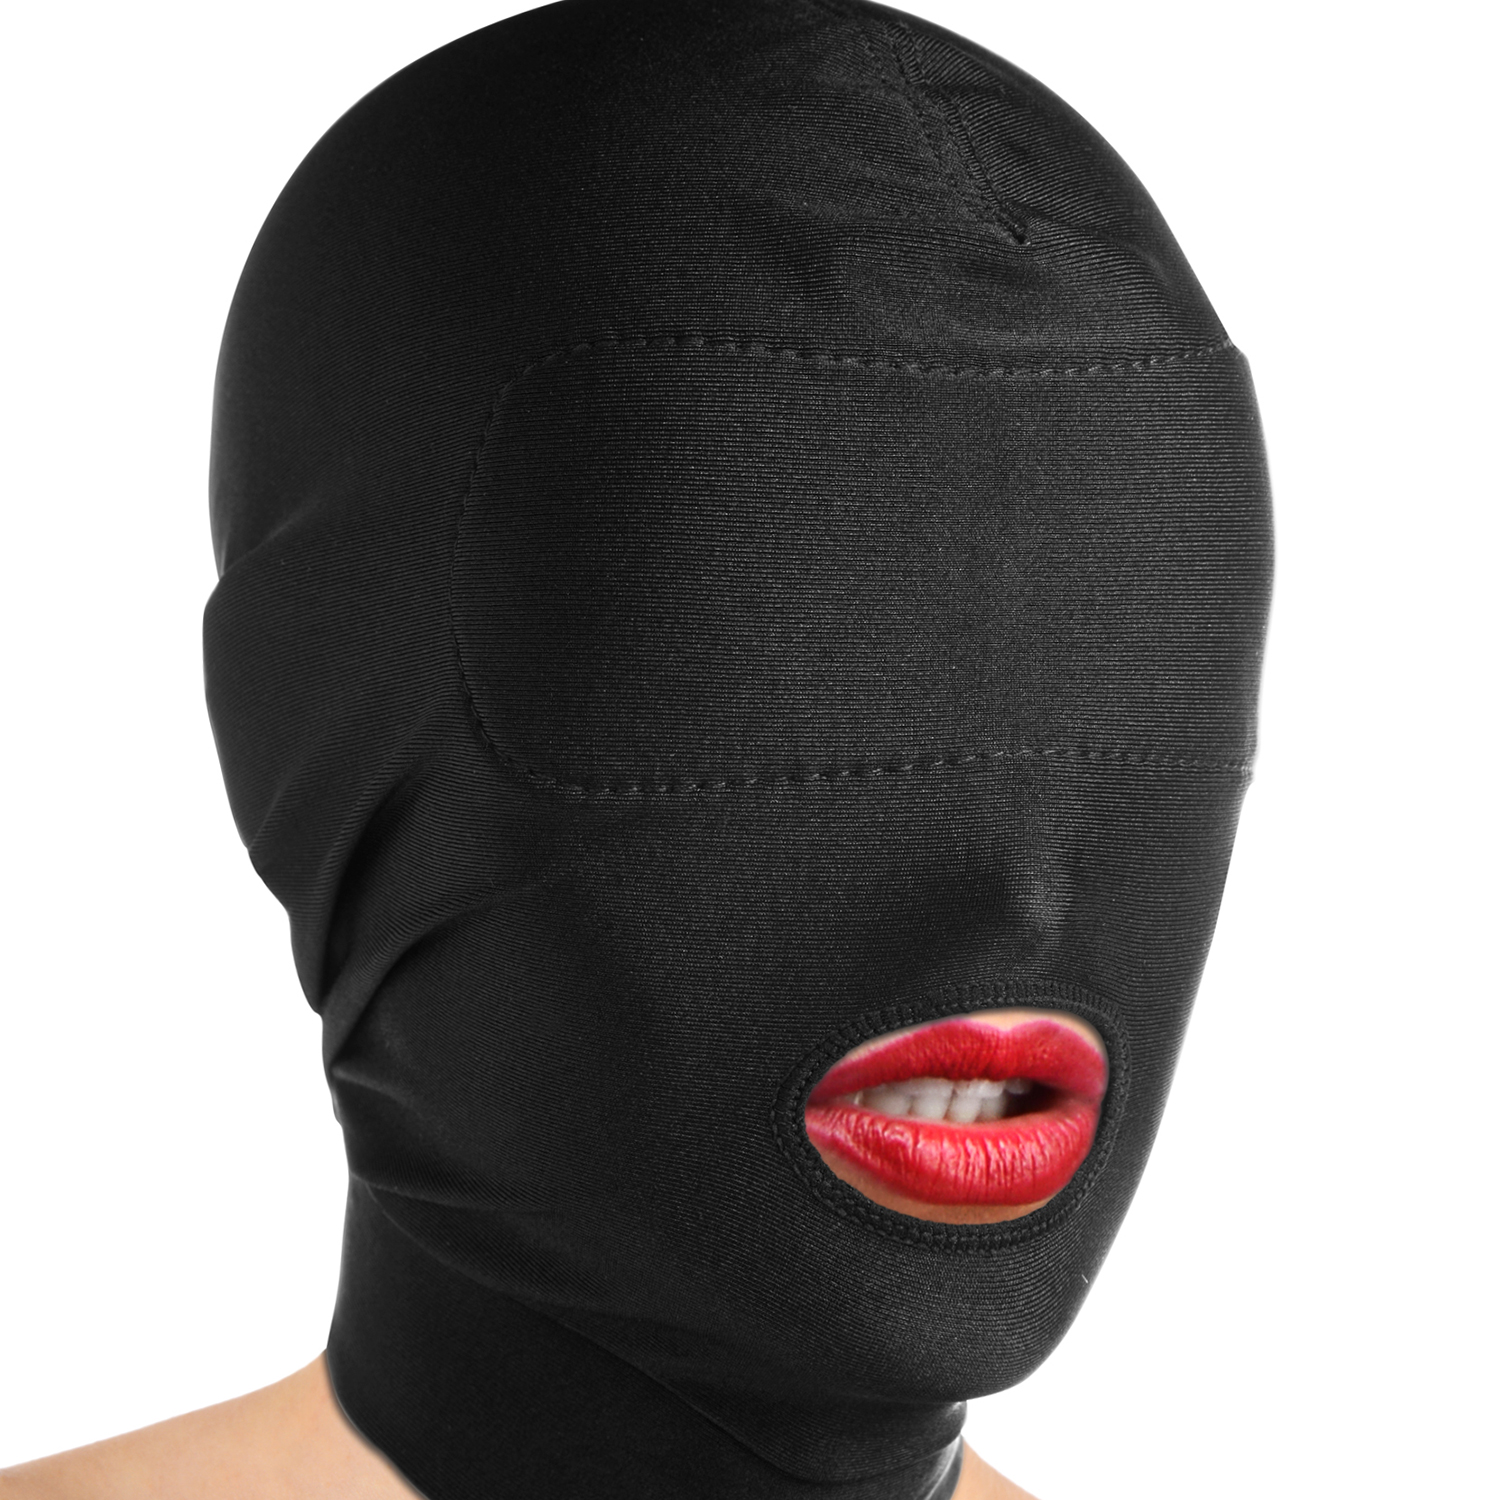 Master Series Disguise Open Mouth Maske med Blindfold - Sort - One Size thumbnail